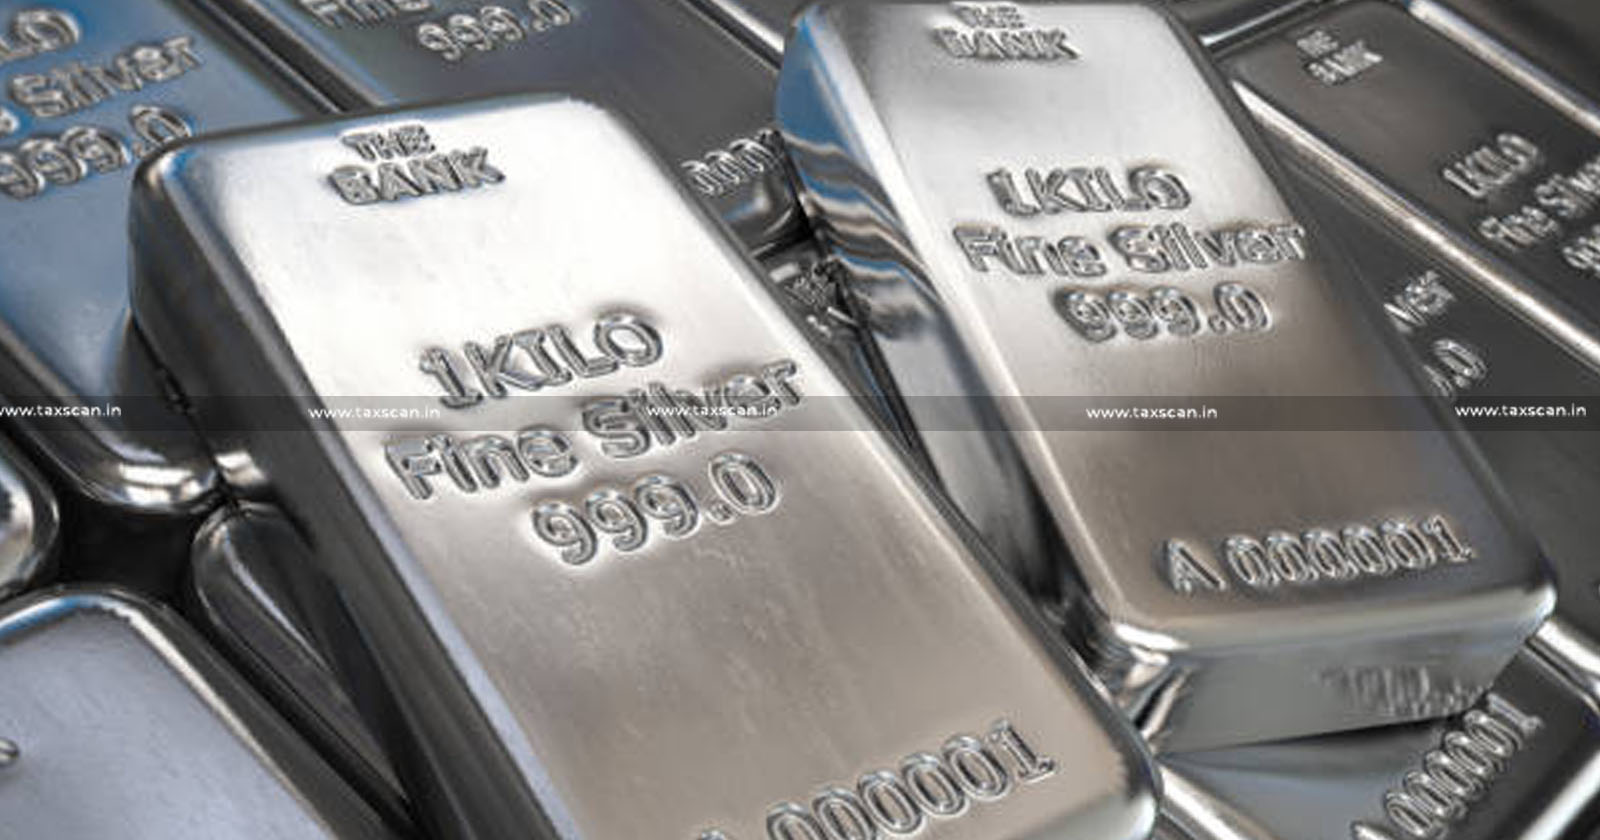 ITAT directs to compute addition towards - profit on sale of silver by assessee found during Search proceedings - TAXSCAN